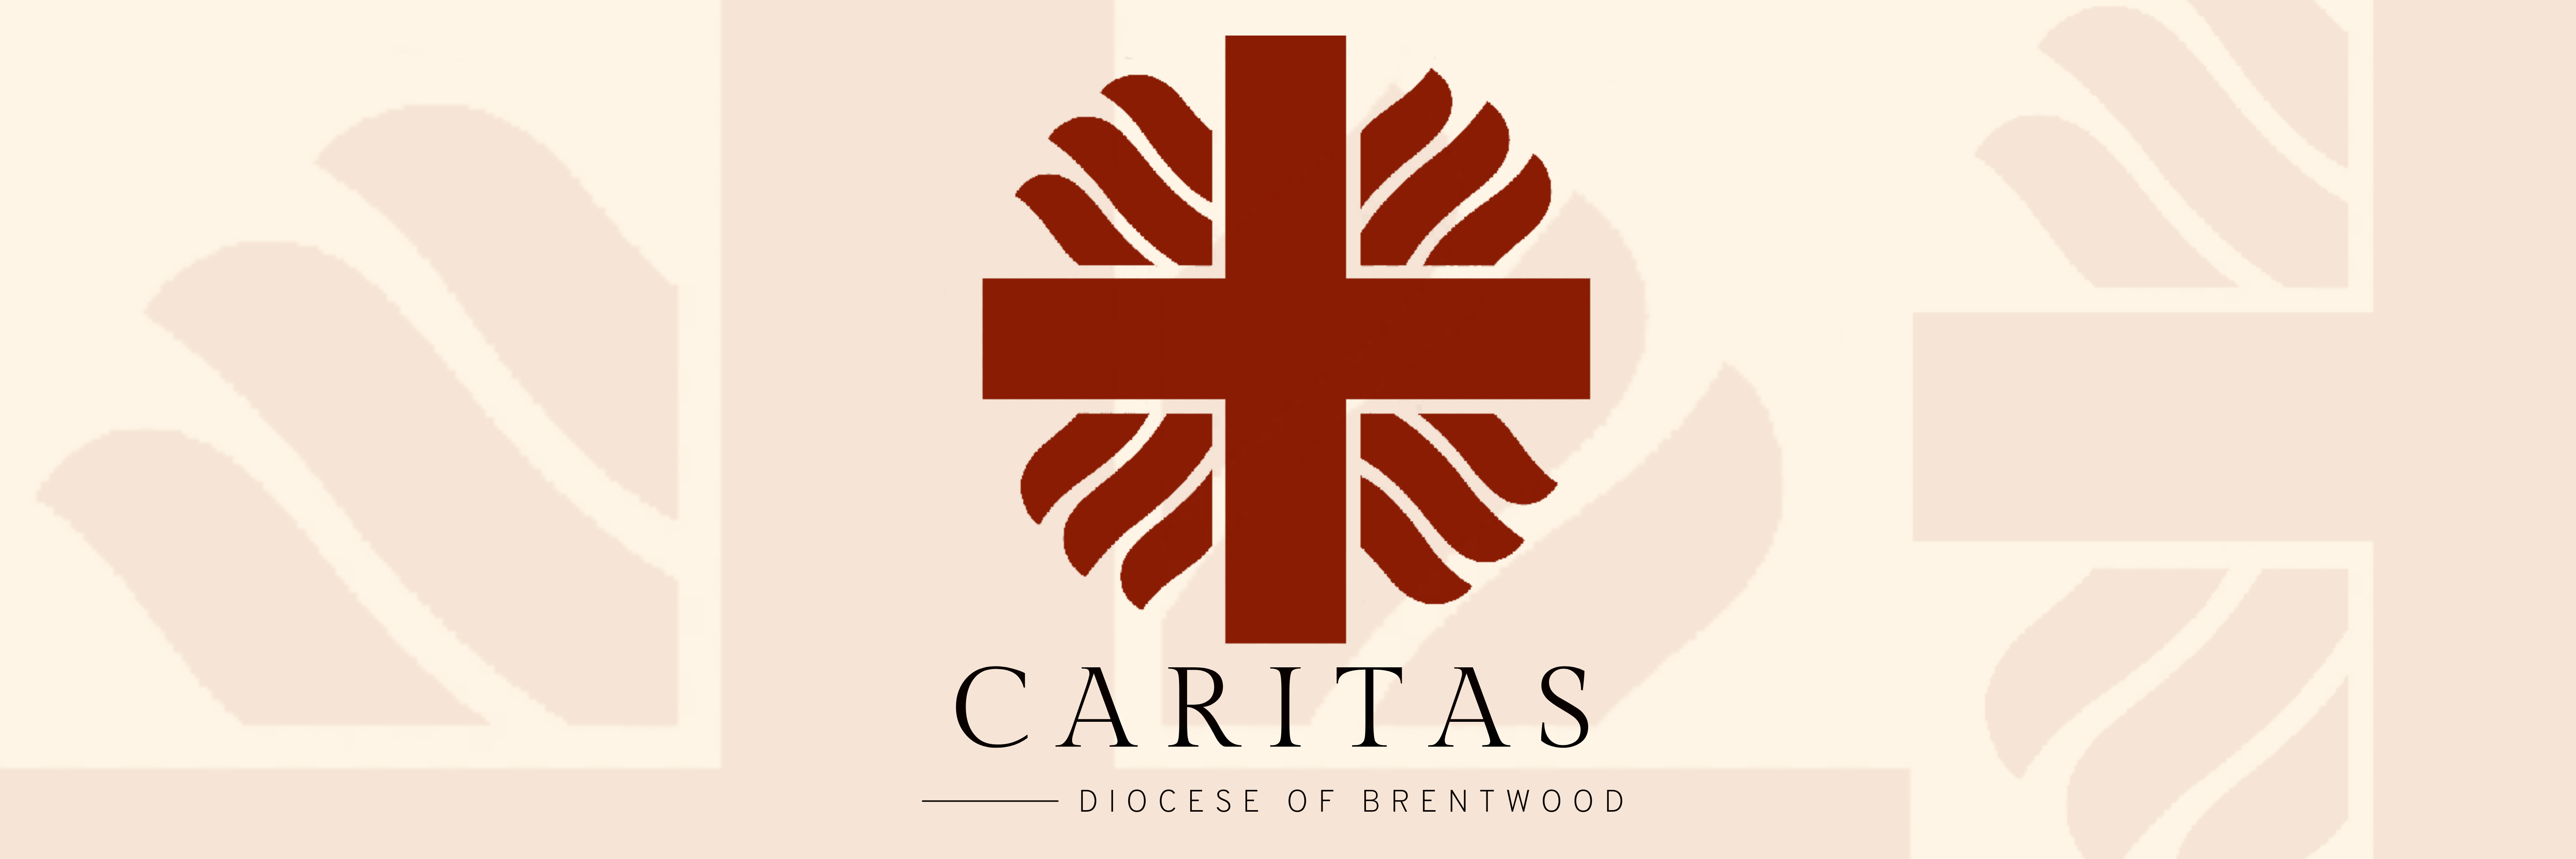 Caritas Diocese of Brentwood